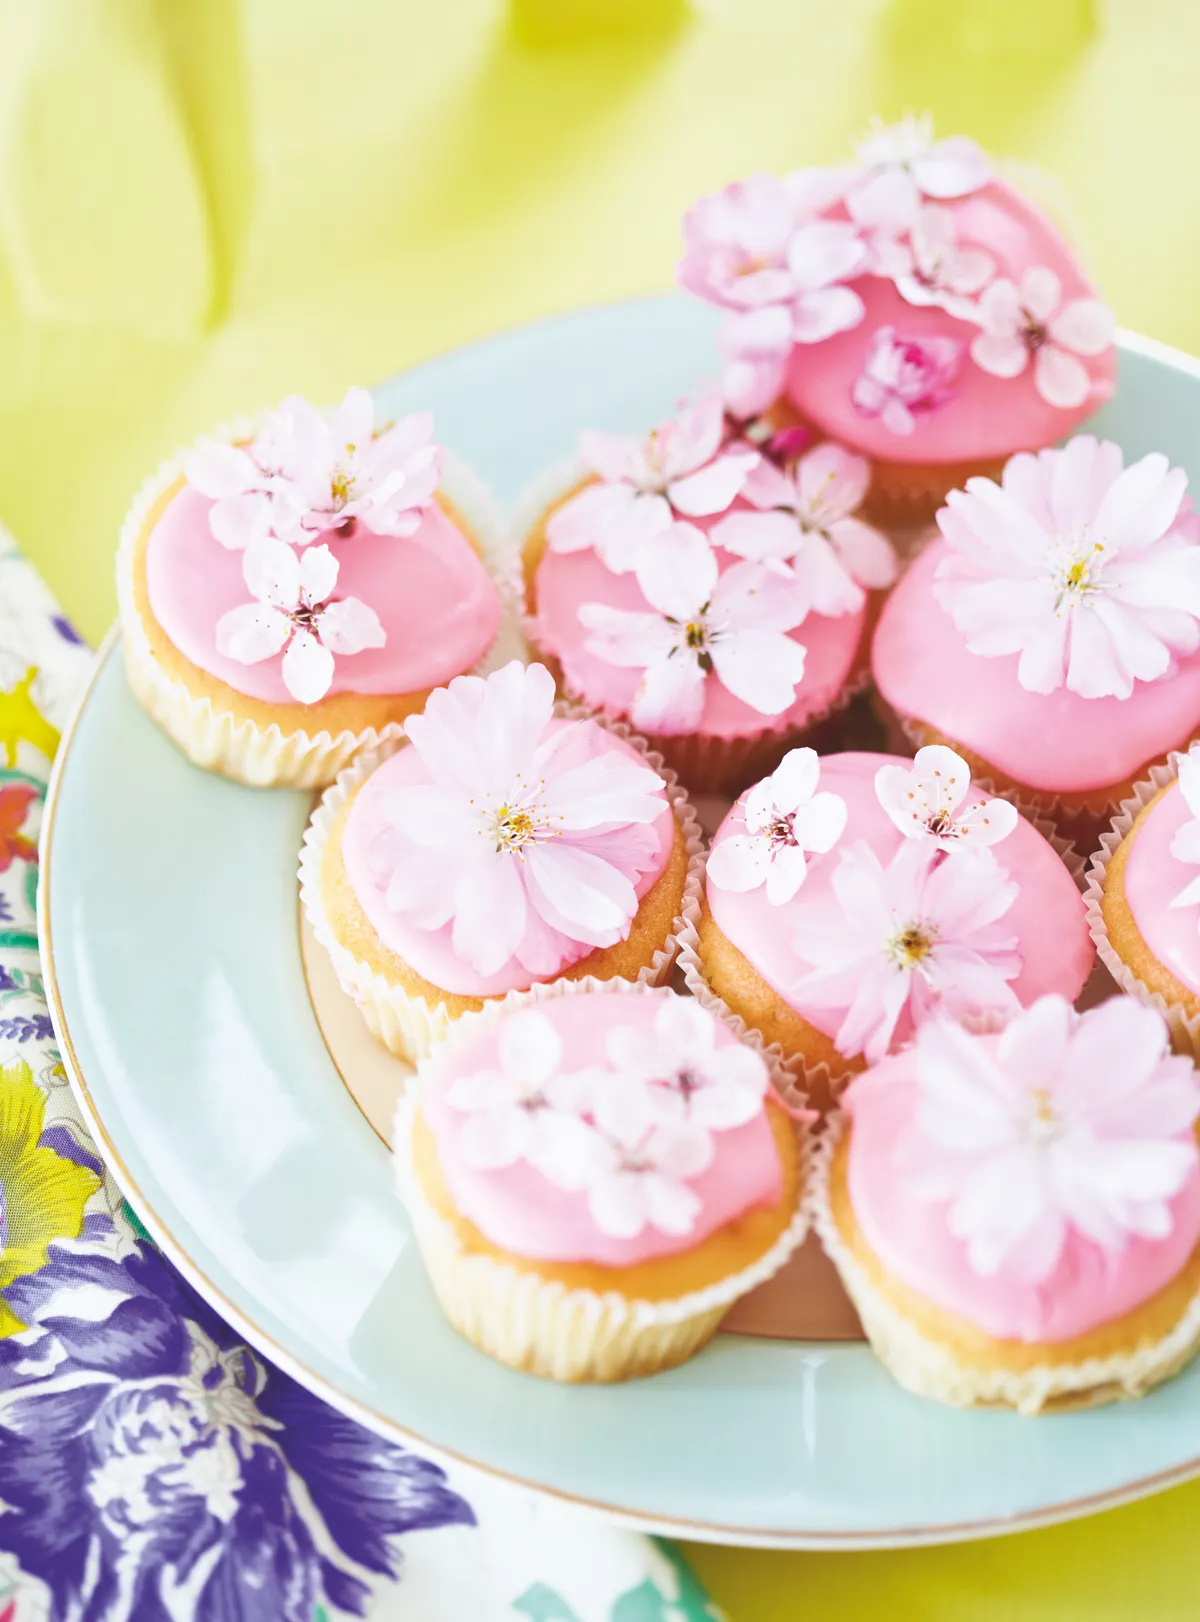 Topped with edible spring flowers, these Mother's Day cupcakes are pretty as a picture. Photography: Sussie Bell